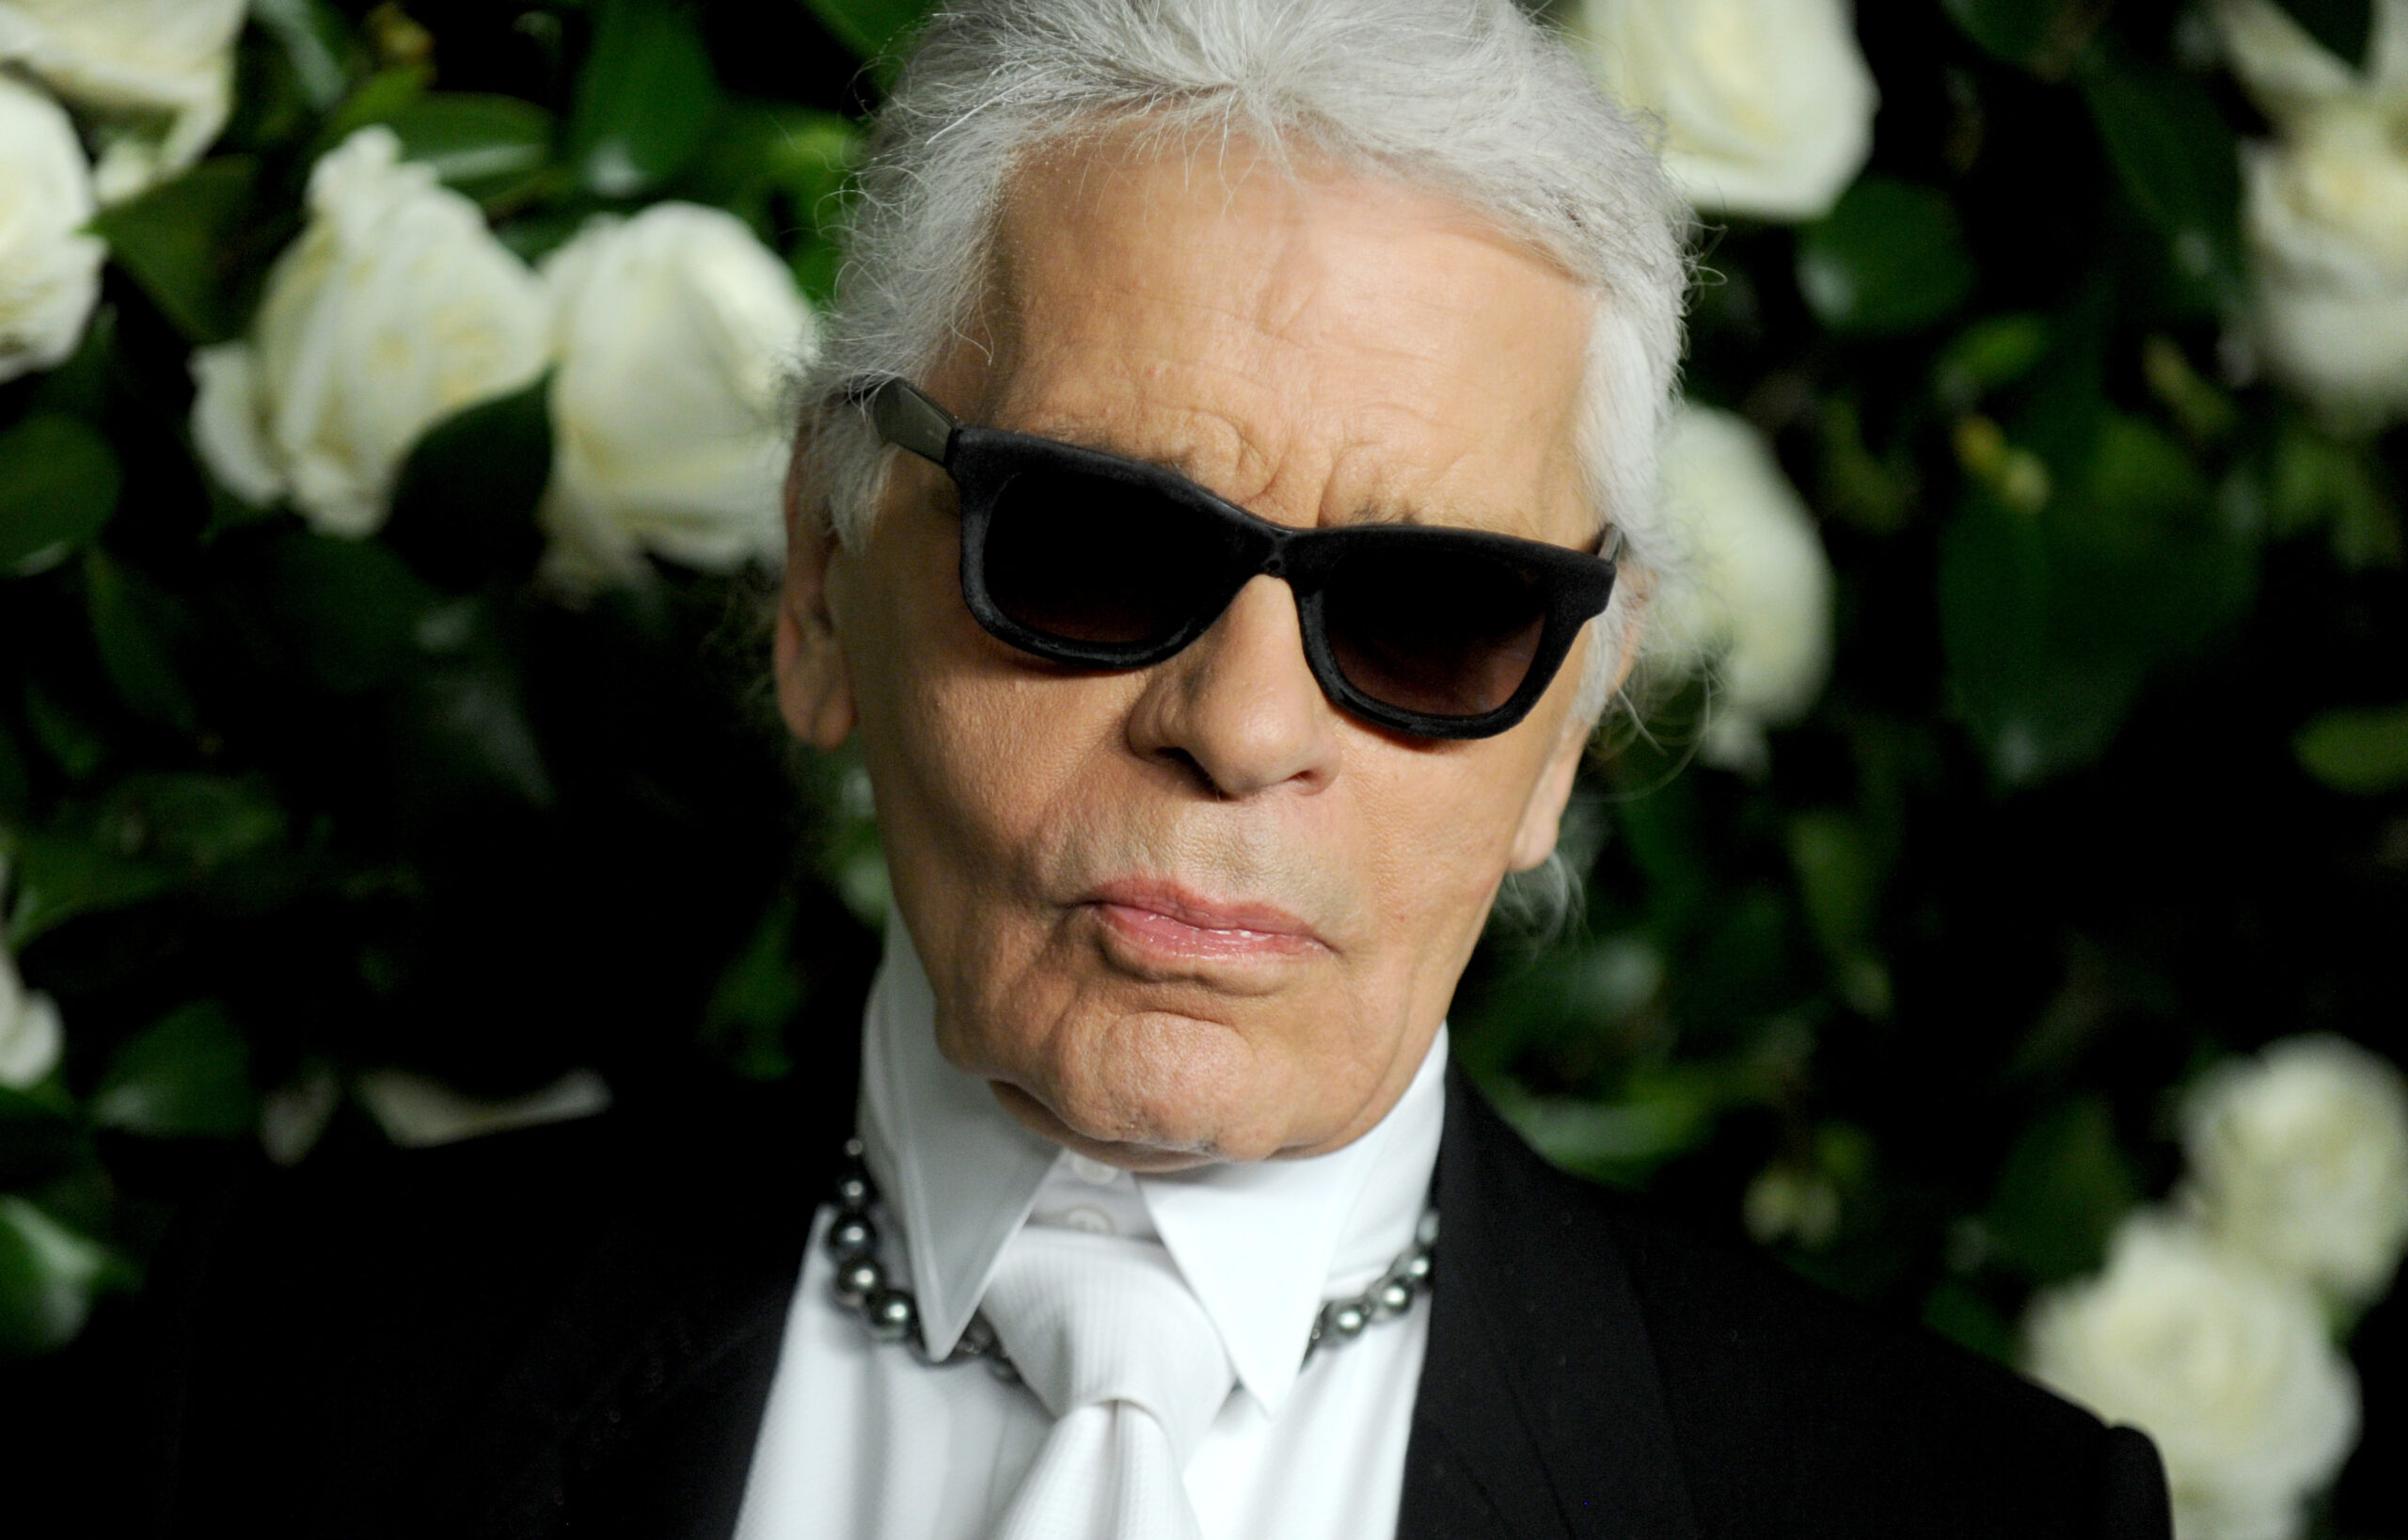 Karl Lagerfeld speaks out against Photoshop